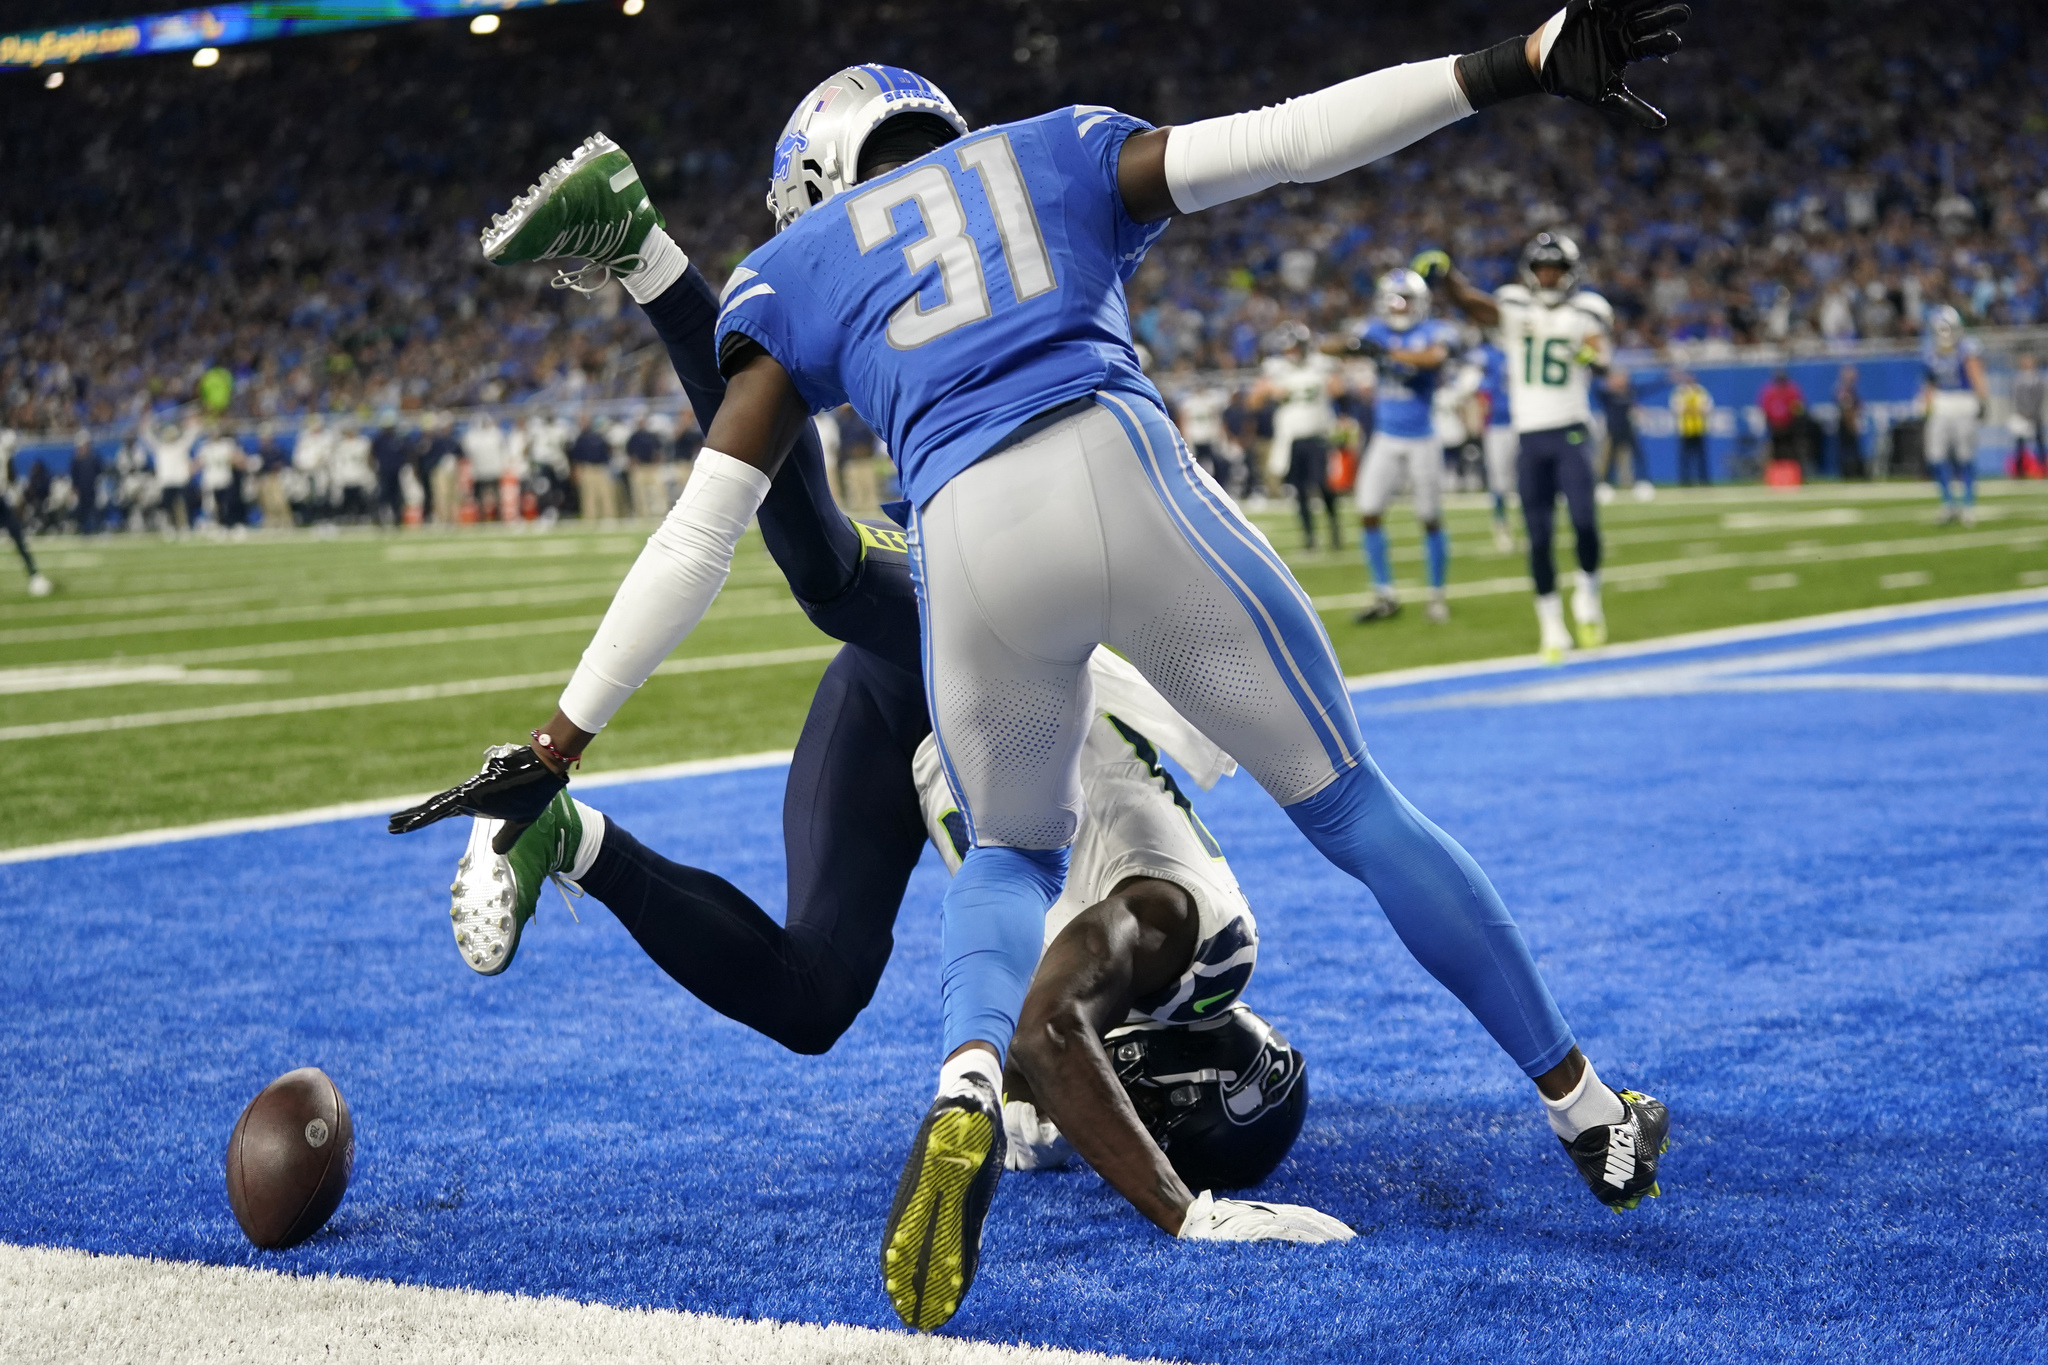 Detroit Lions safety Kerby Joseph (31) breaks up a pass intended for Seattle Seahawks wide receiver lt;HIT gt;DK lt;/HIT gt; lt;HIT gt;Metcalf lt;/HIT gt; during the second half of an NFL football game, Sunday, Sept. 17, 2023, in Detroit. (AP Photo/Paul Sancya)